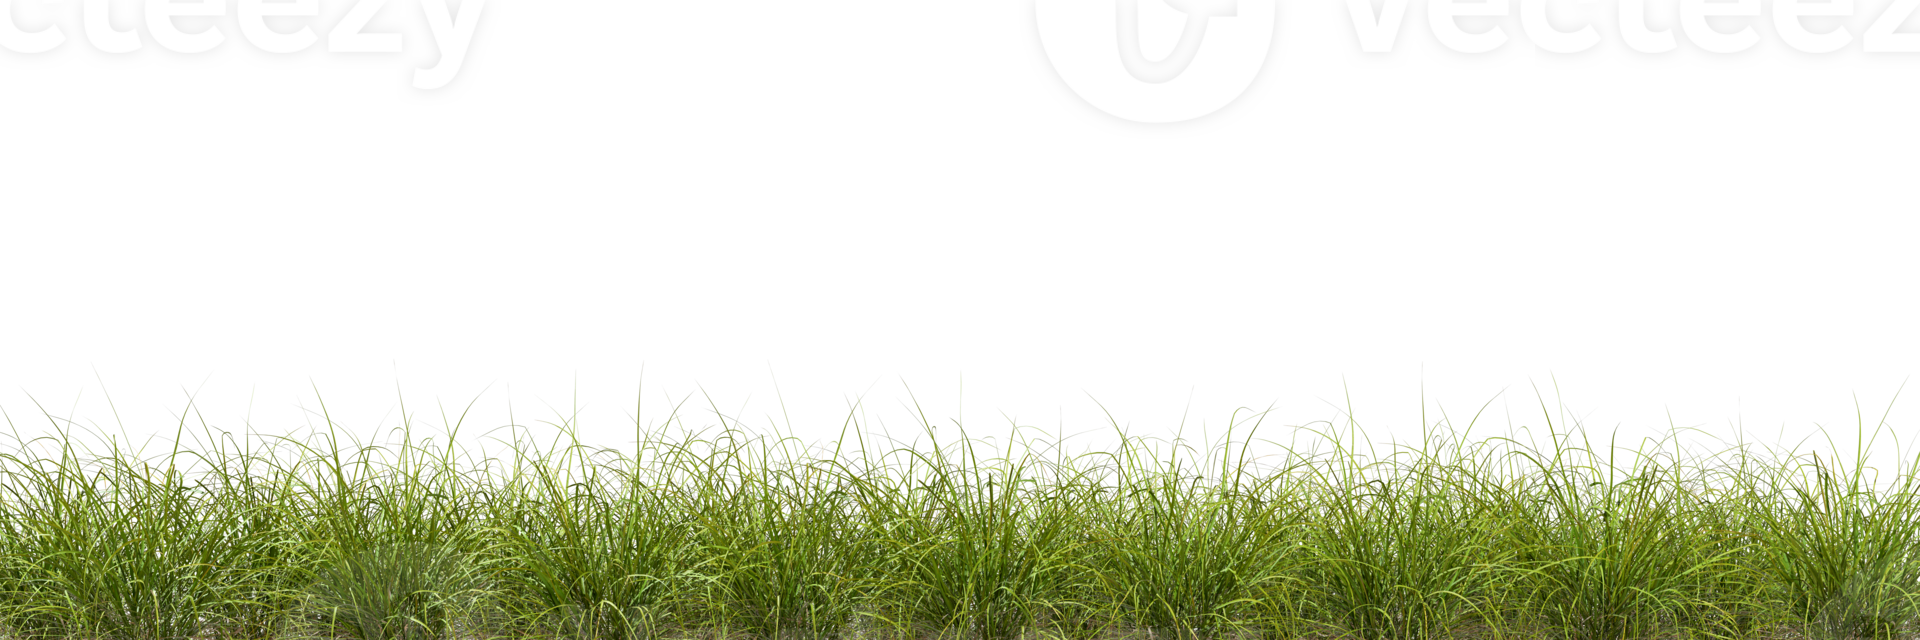 Meadow green grass row horizontal cut backgrounds 3d rendering png